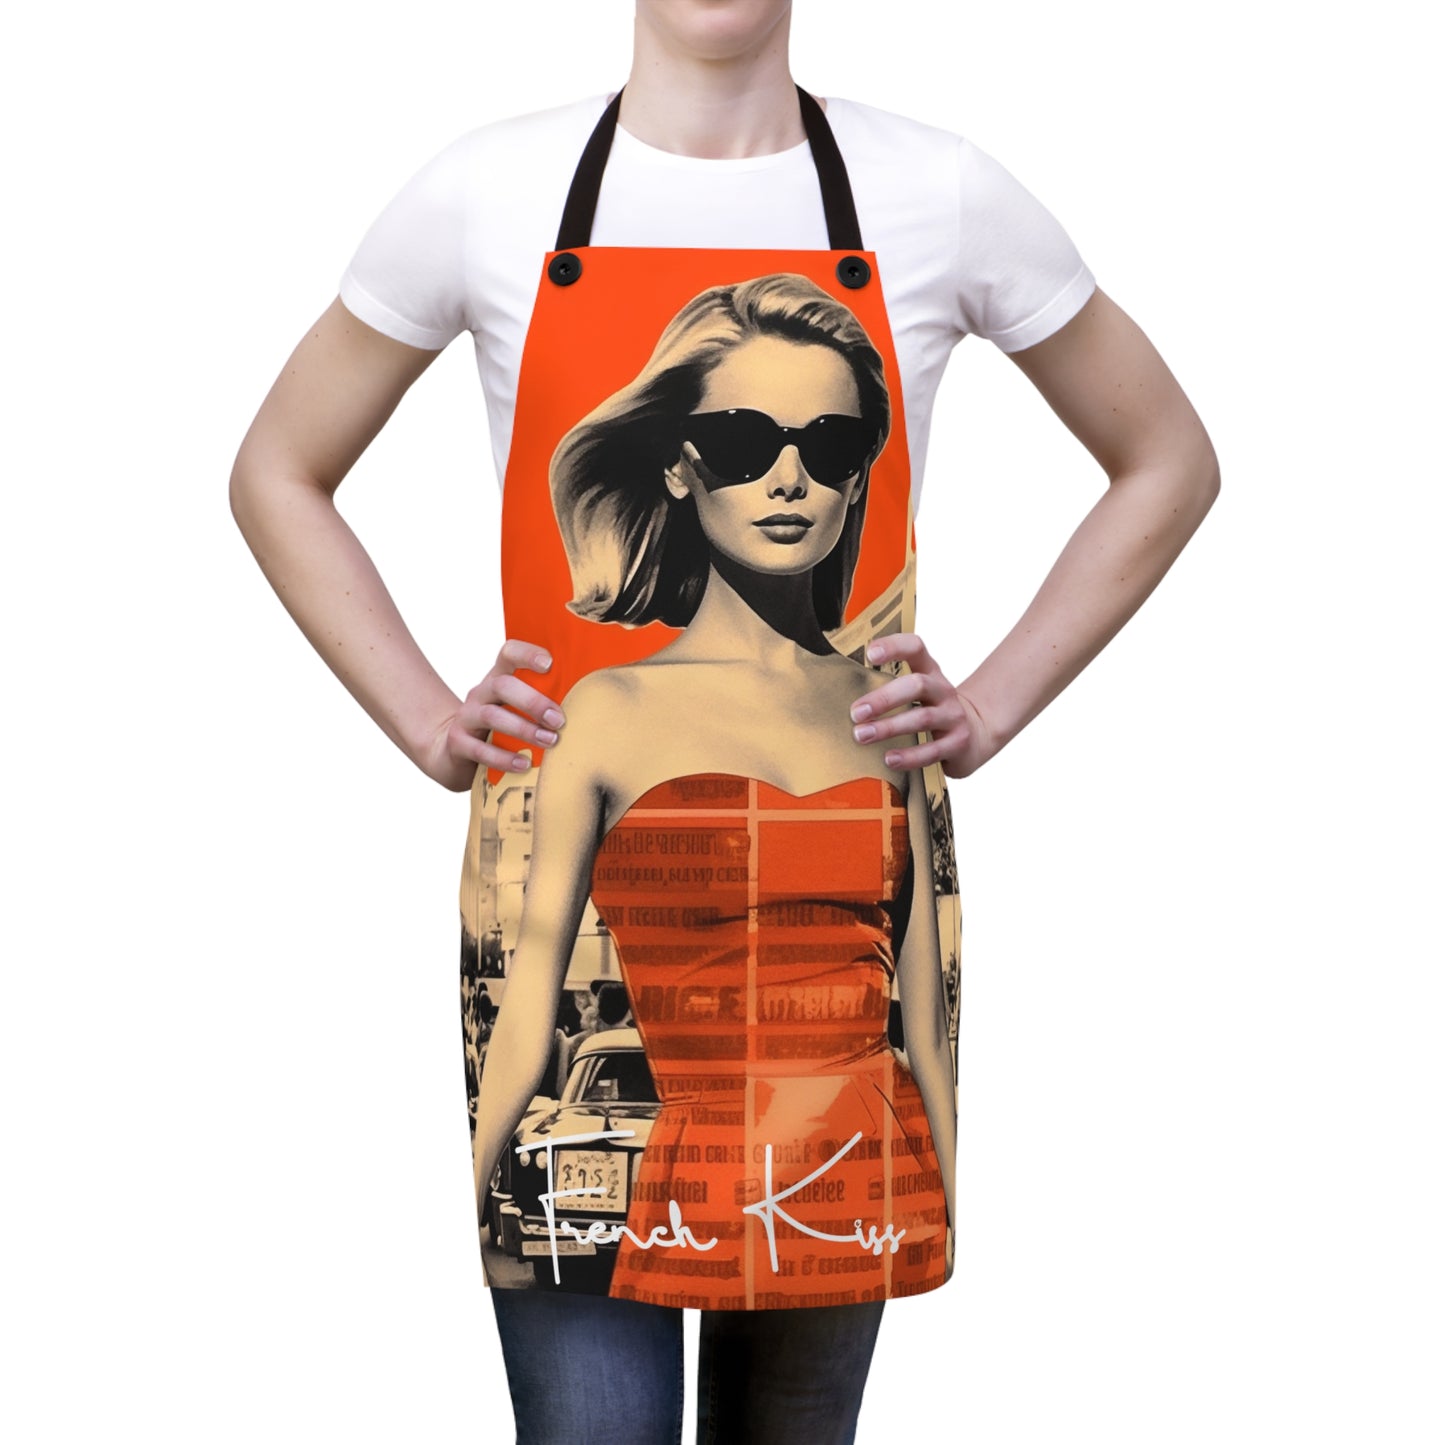 JENNY Chef APRON, French Couture, Pop Art, Travel, Fashion, Gourmet, Cuisine, Cook, France, must have gift item